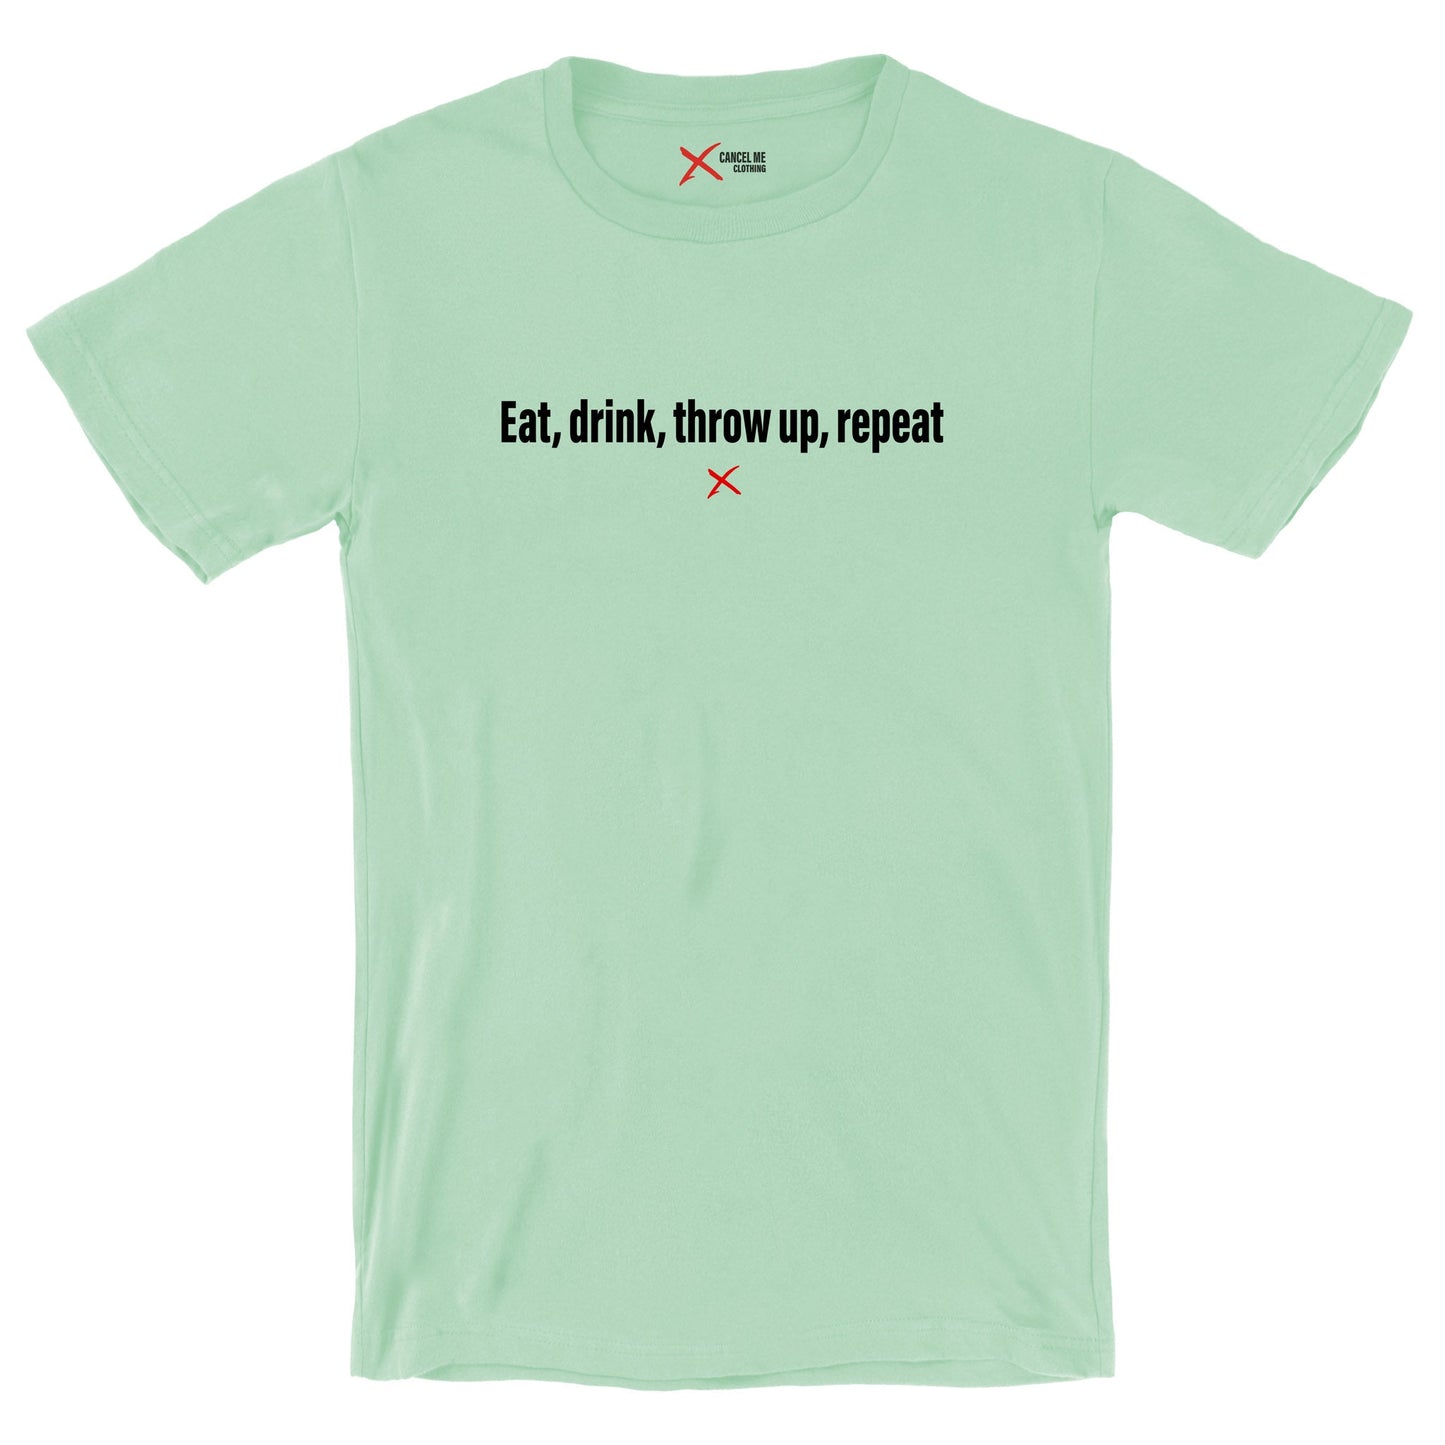 Eat, drink, throw up, repeat - Shirt